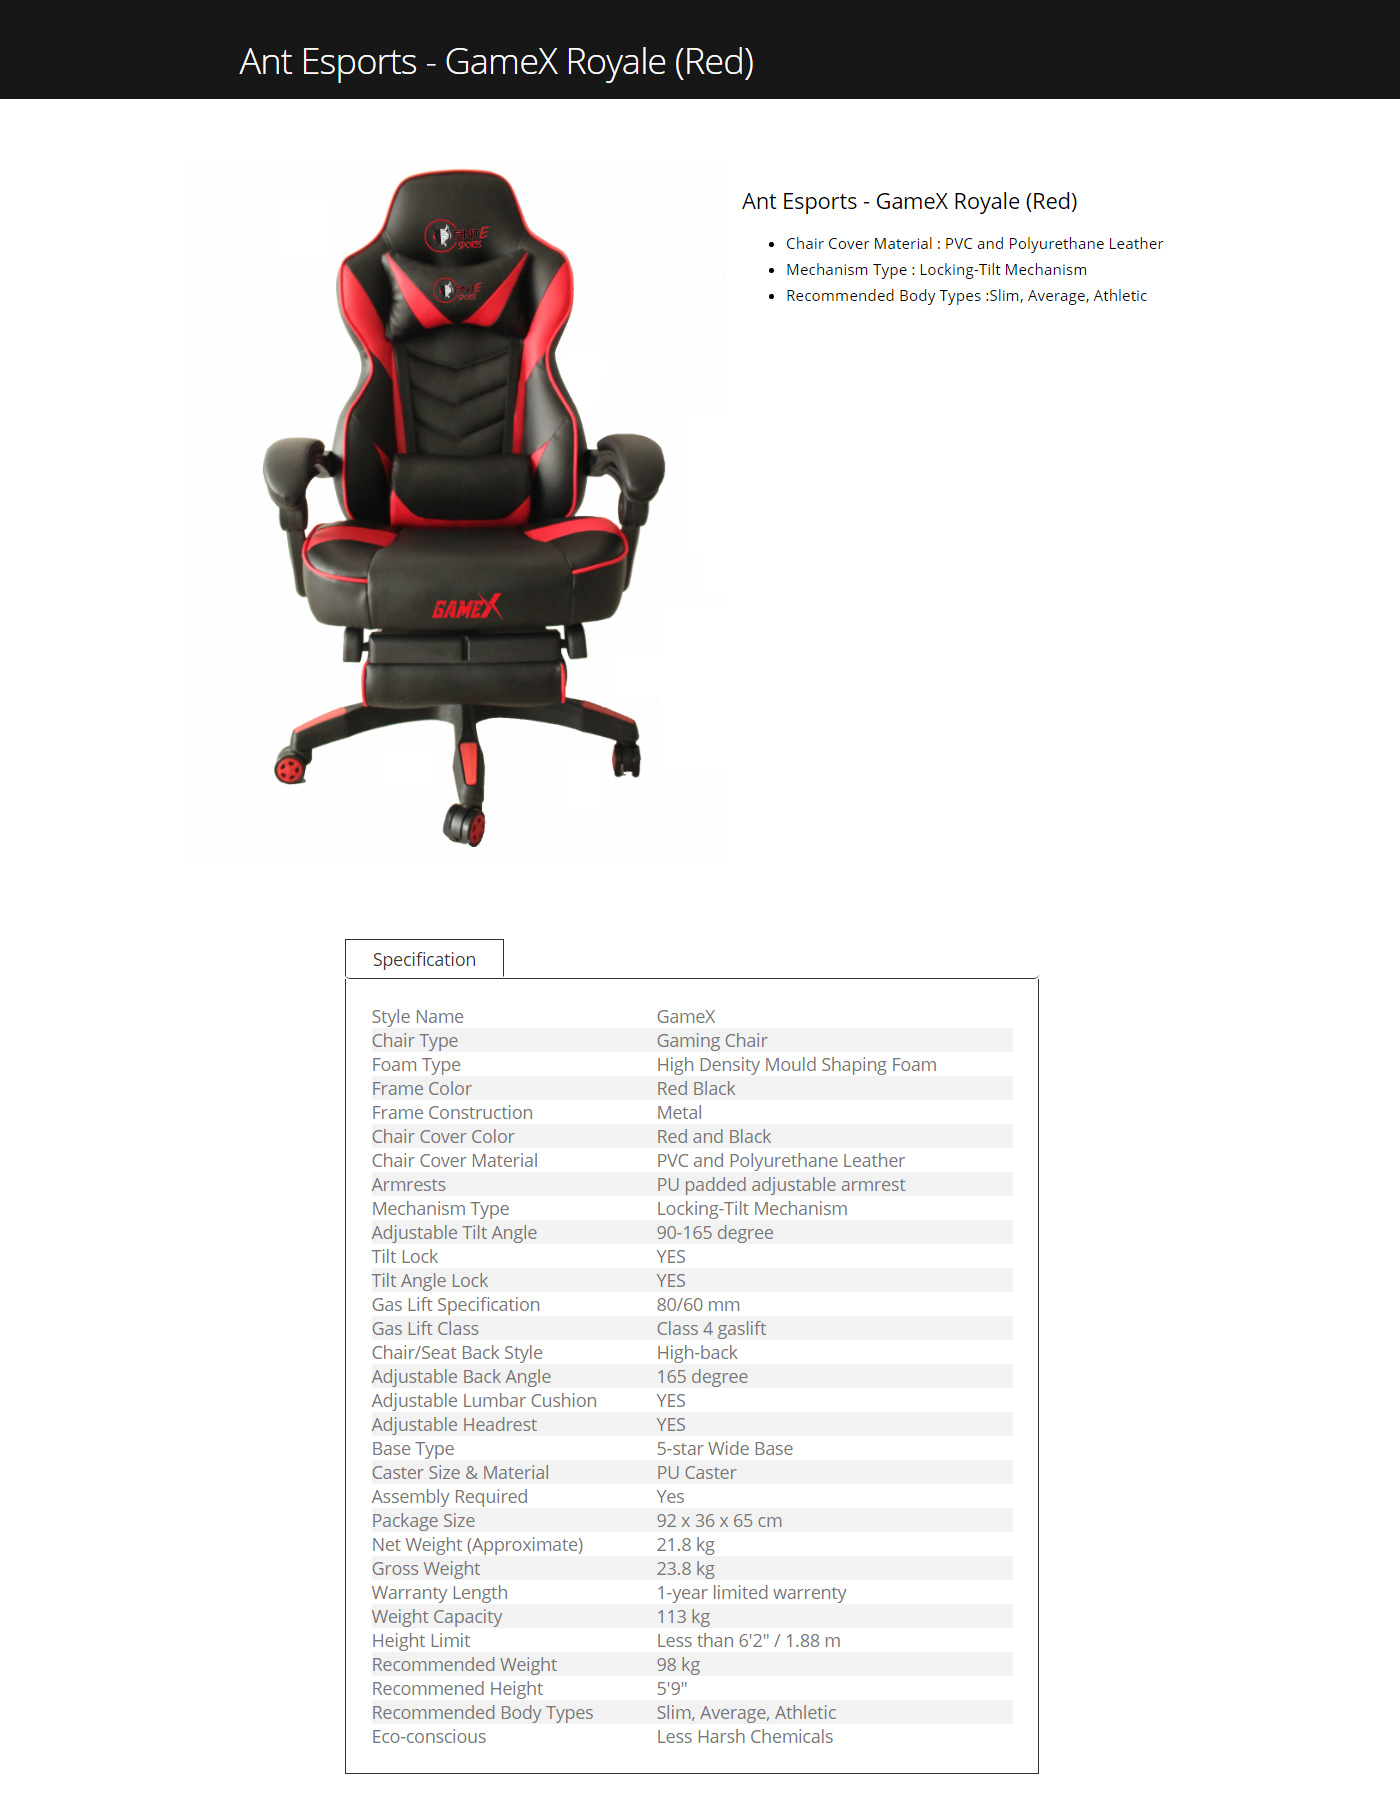  Buy Online Ant Esports GameX Royale Gaming Chair With Foot Rest - Red